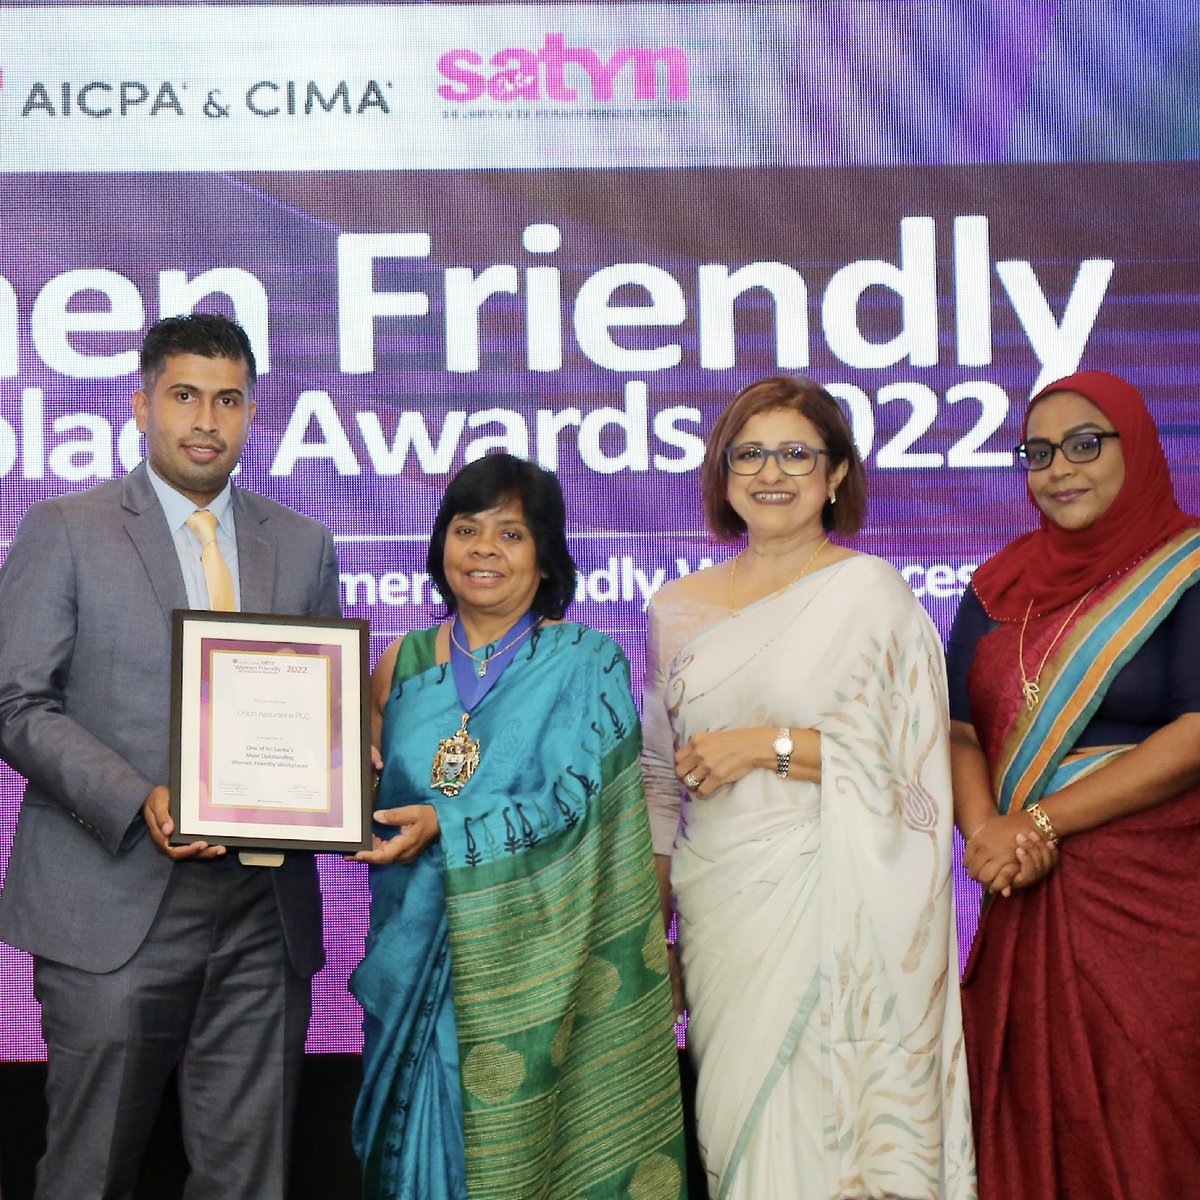 Coming up - Sri Lanka's sole women focused awards - Satynmag AICPA&CIMA Women Friendly Workplace Awards 2023. So proud of the progress the awards have made in empowering women in the Sri Lankan workplace. #SriLanka #WomenEmpowerment #WomenInBusiness #lka #Career #Empowerment